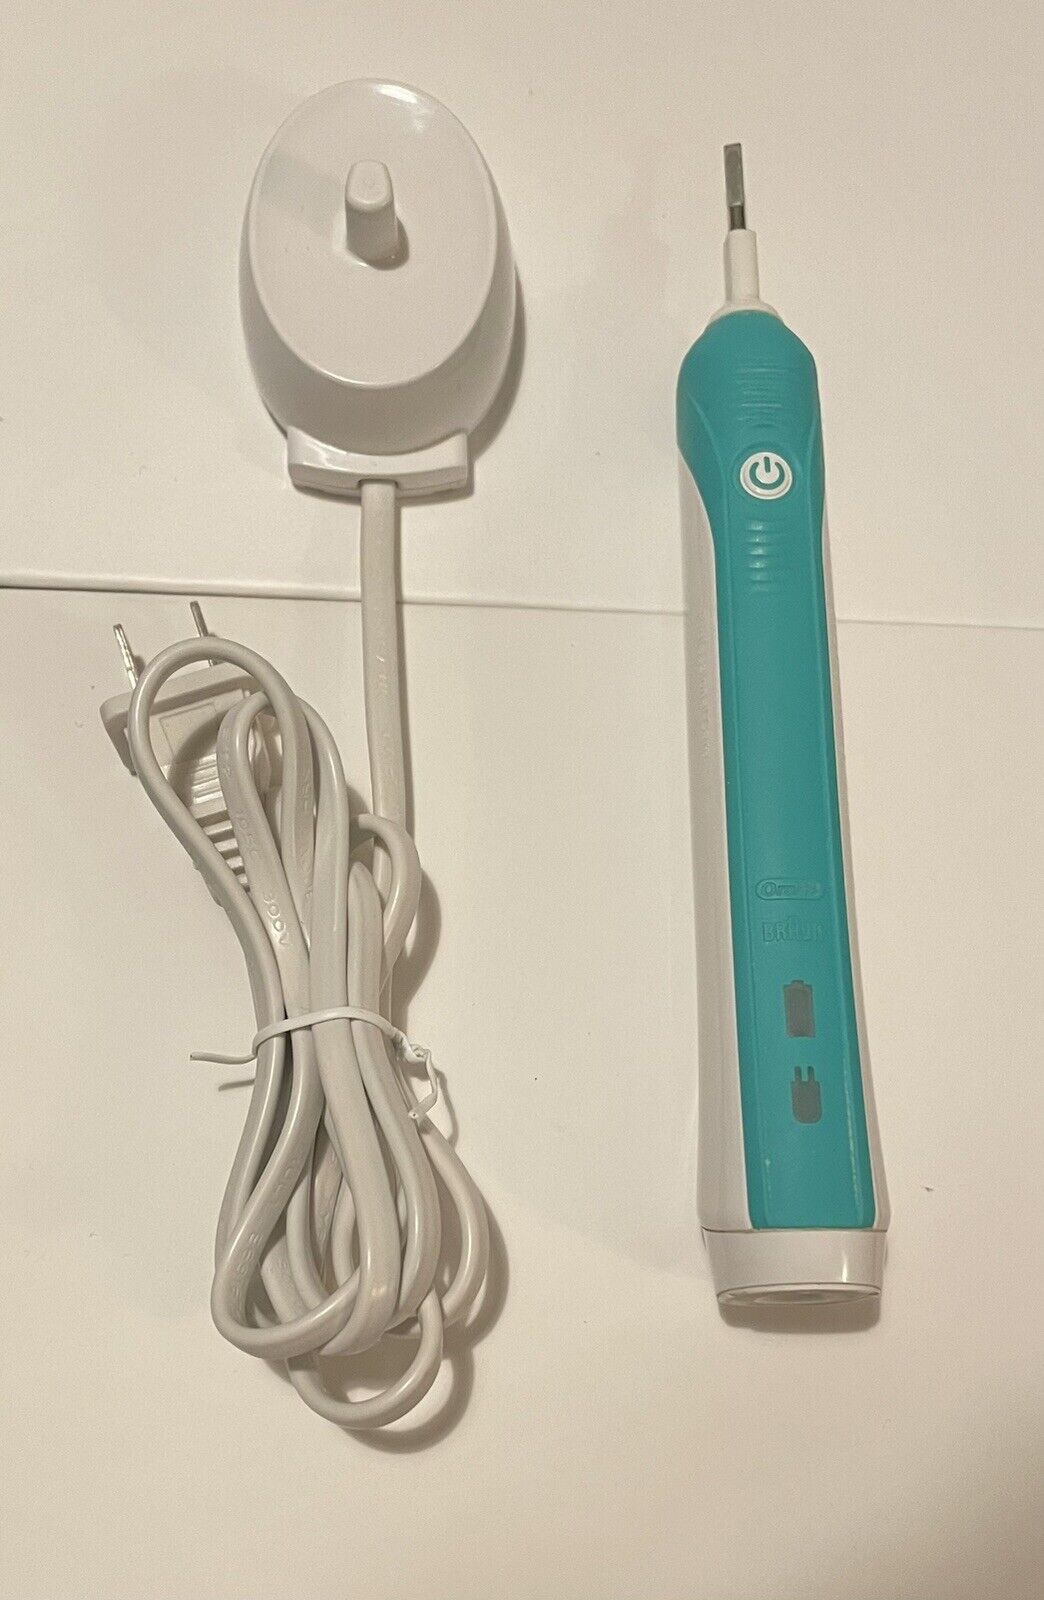 Planlagt Bering strædet Jolly Braun OralB Professional Care Electric Toothbrush 3756 Handle And Charger |  eBay